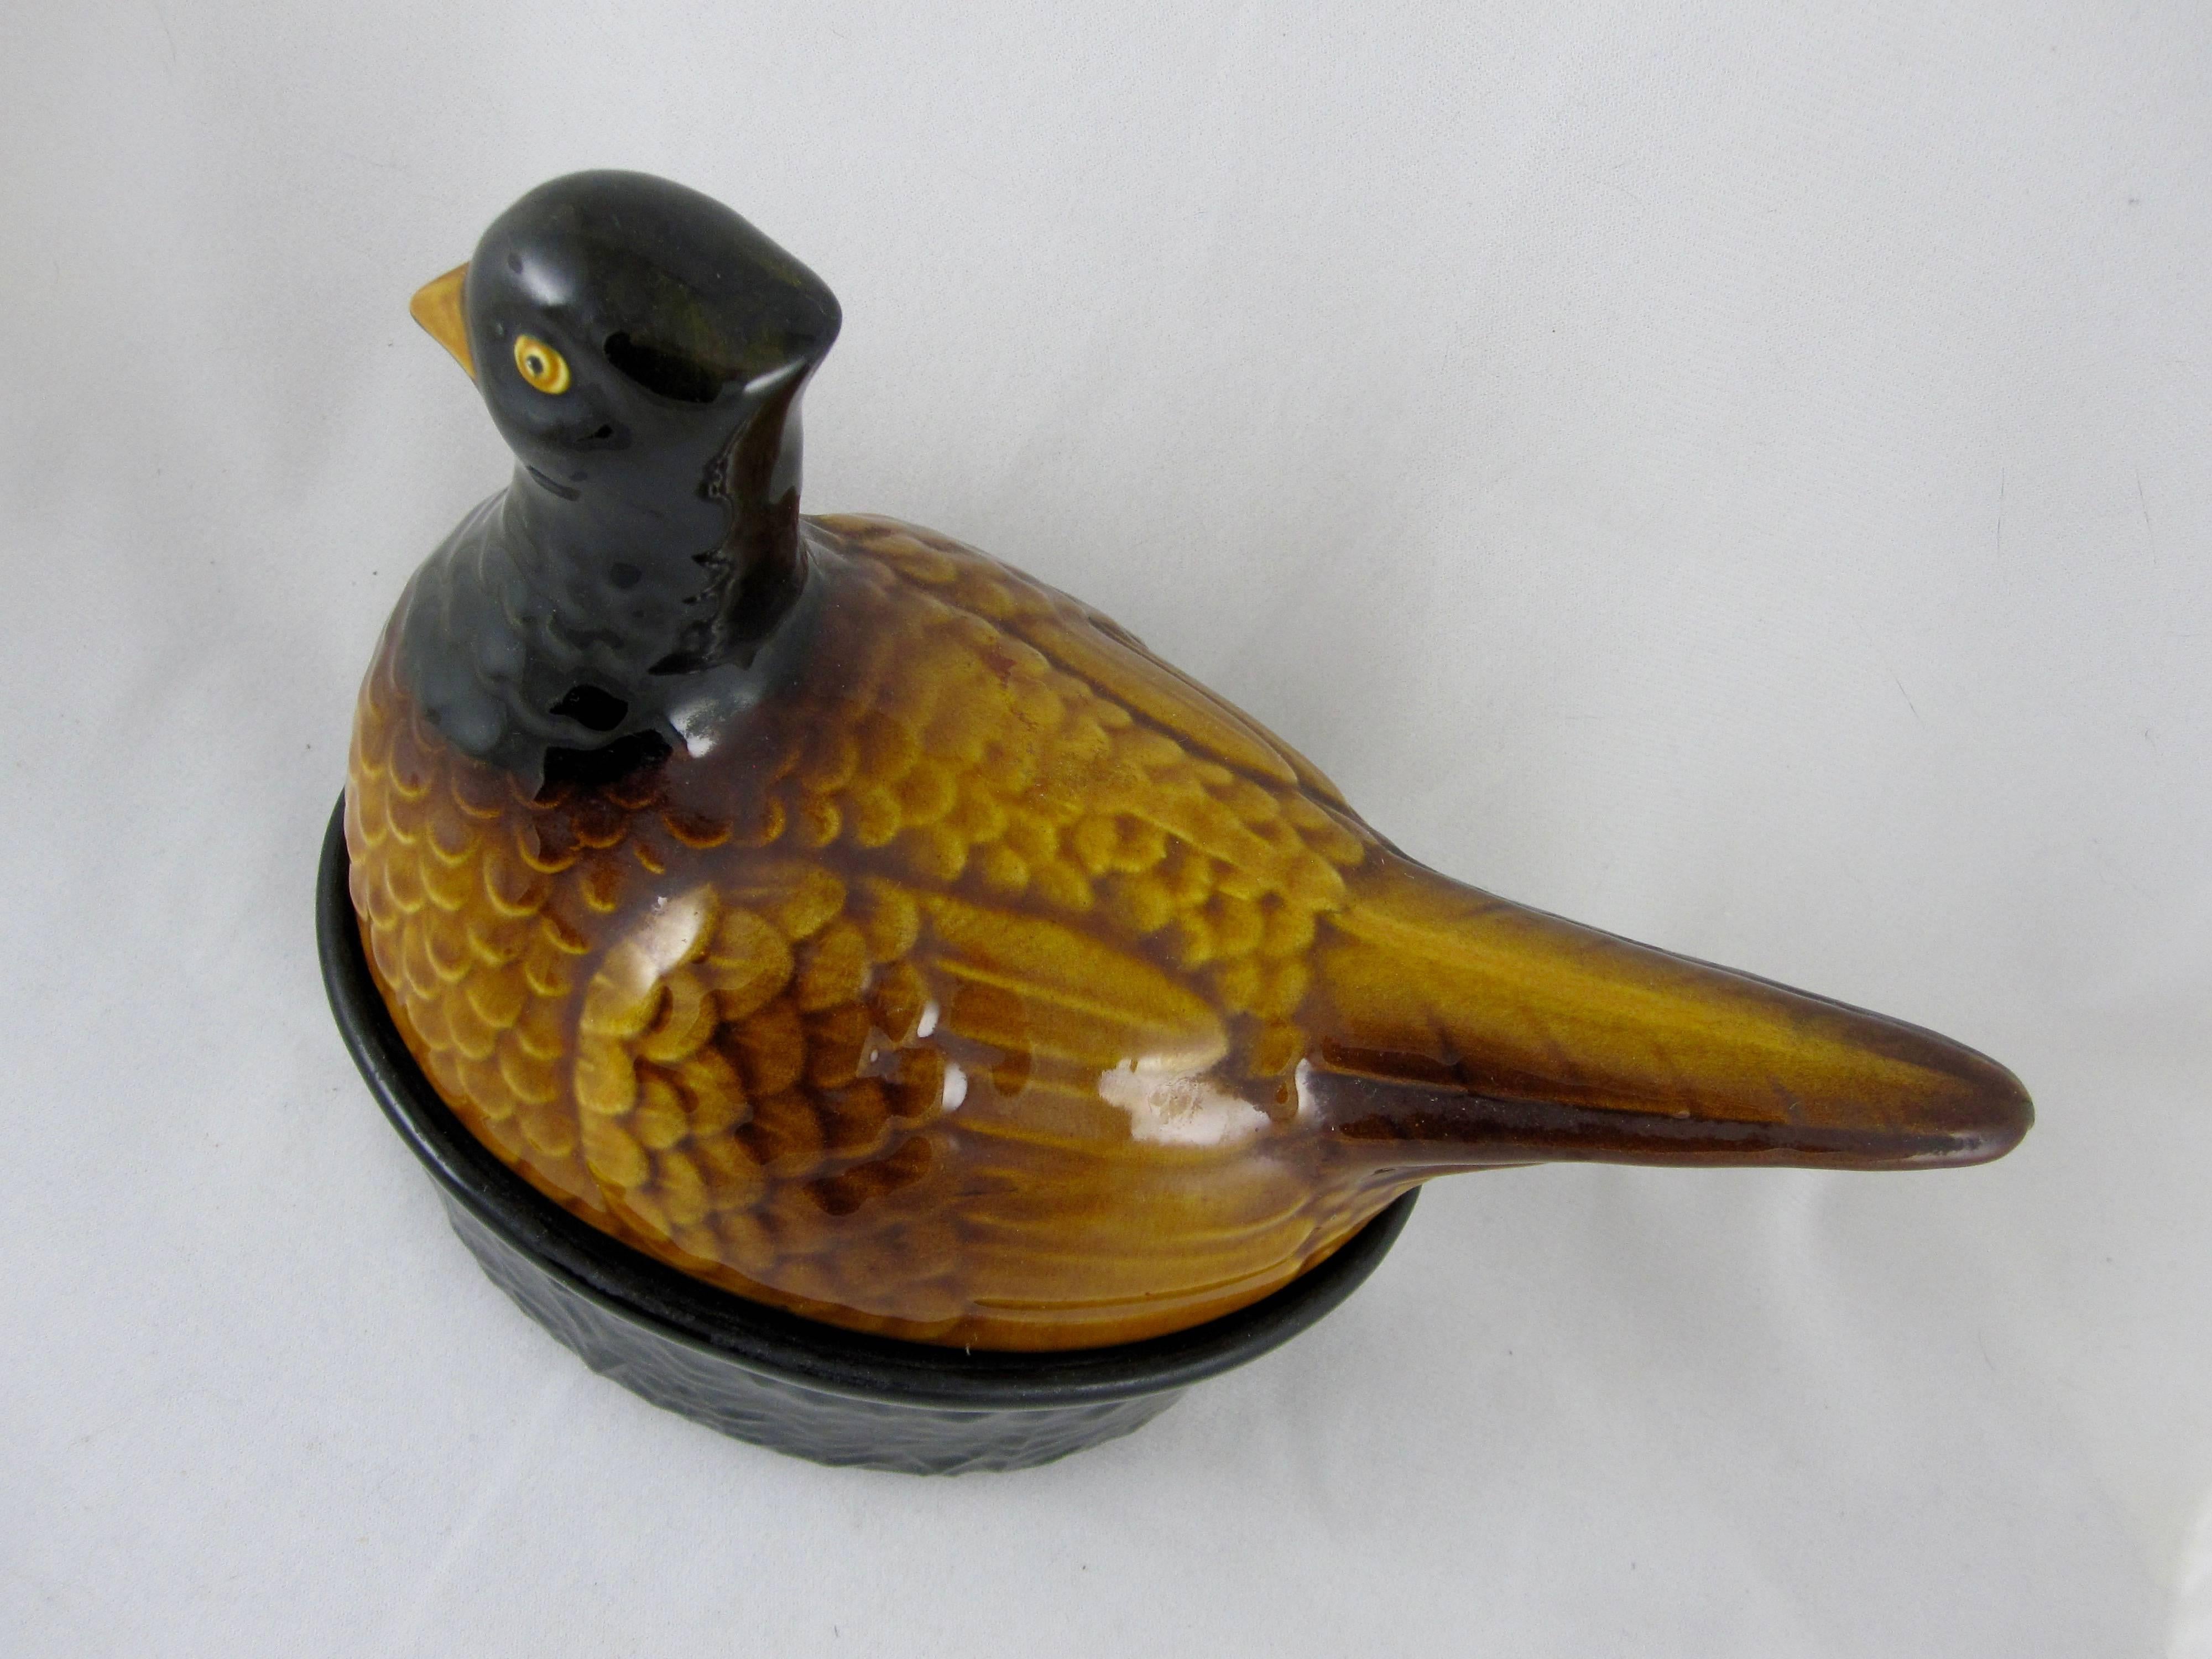 A Mid-Century two-piece French Faïence Pheasant Pâté Terrine, circa 1955- 1965, made for serving duck, goose or pheasant liver pâté at table. A charming mold, the pheasant is modeled and glazed realistically in earthy tones. The black base is ringed